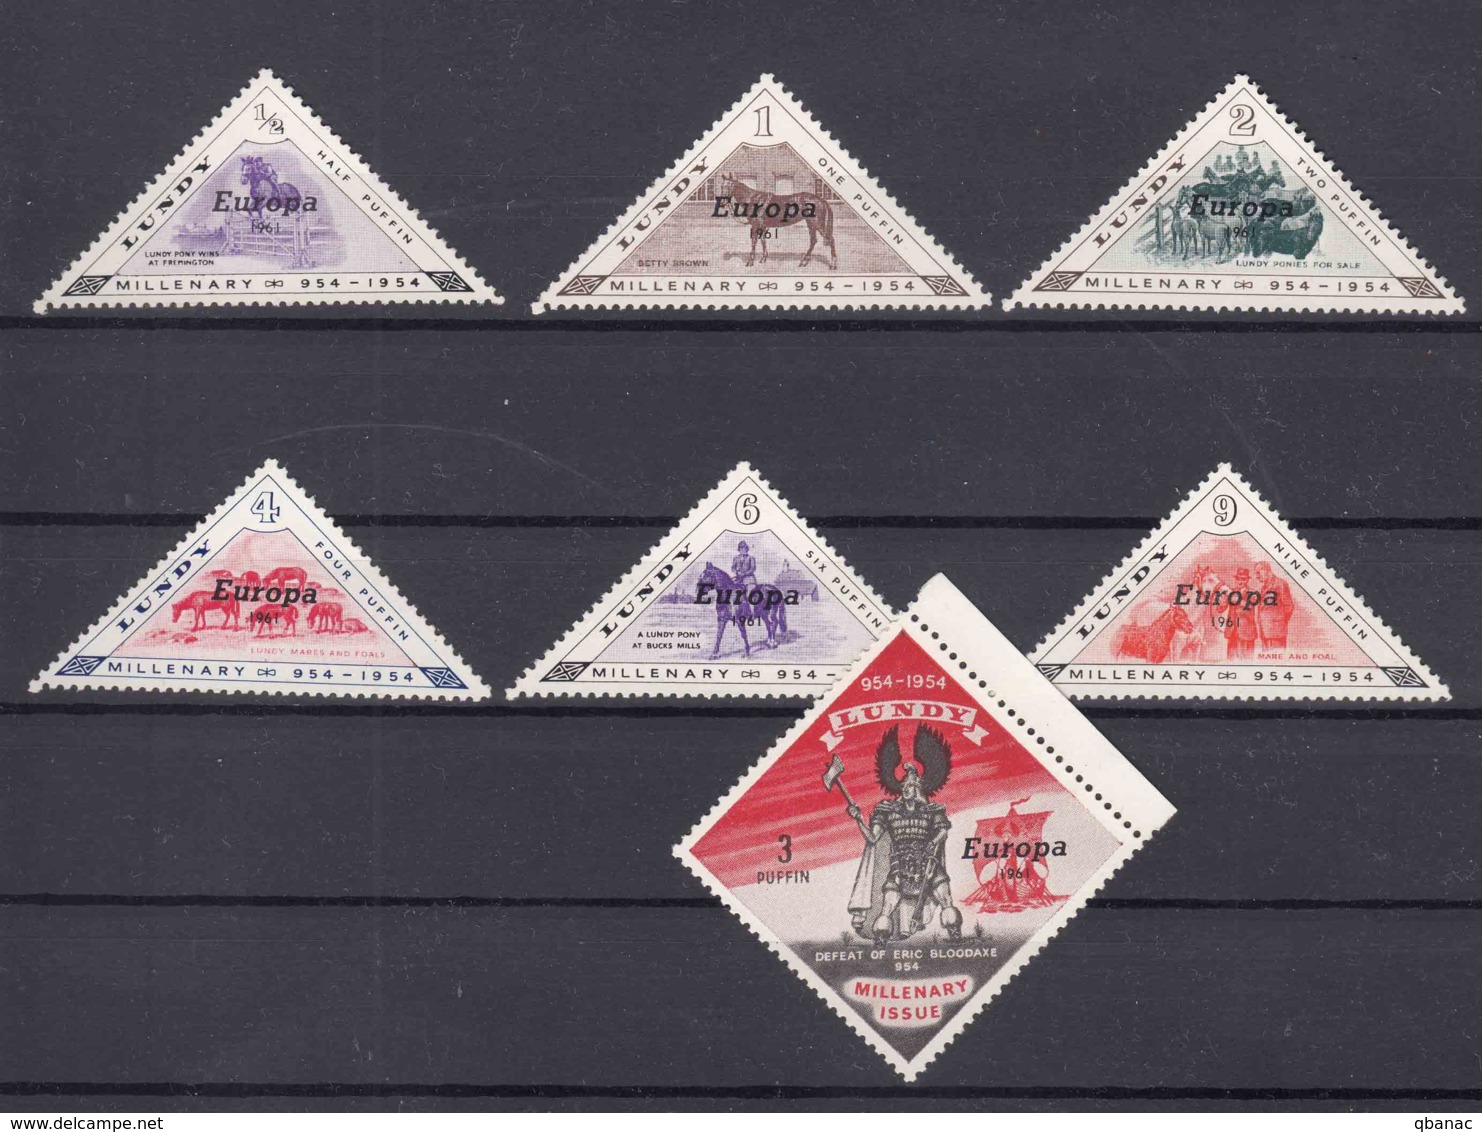 Great Britain Lundy 1961 Europa Private Issue, Horses, Mint Never Hinged - Local Issues